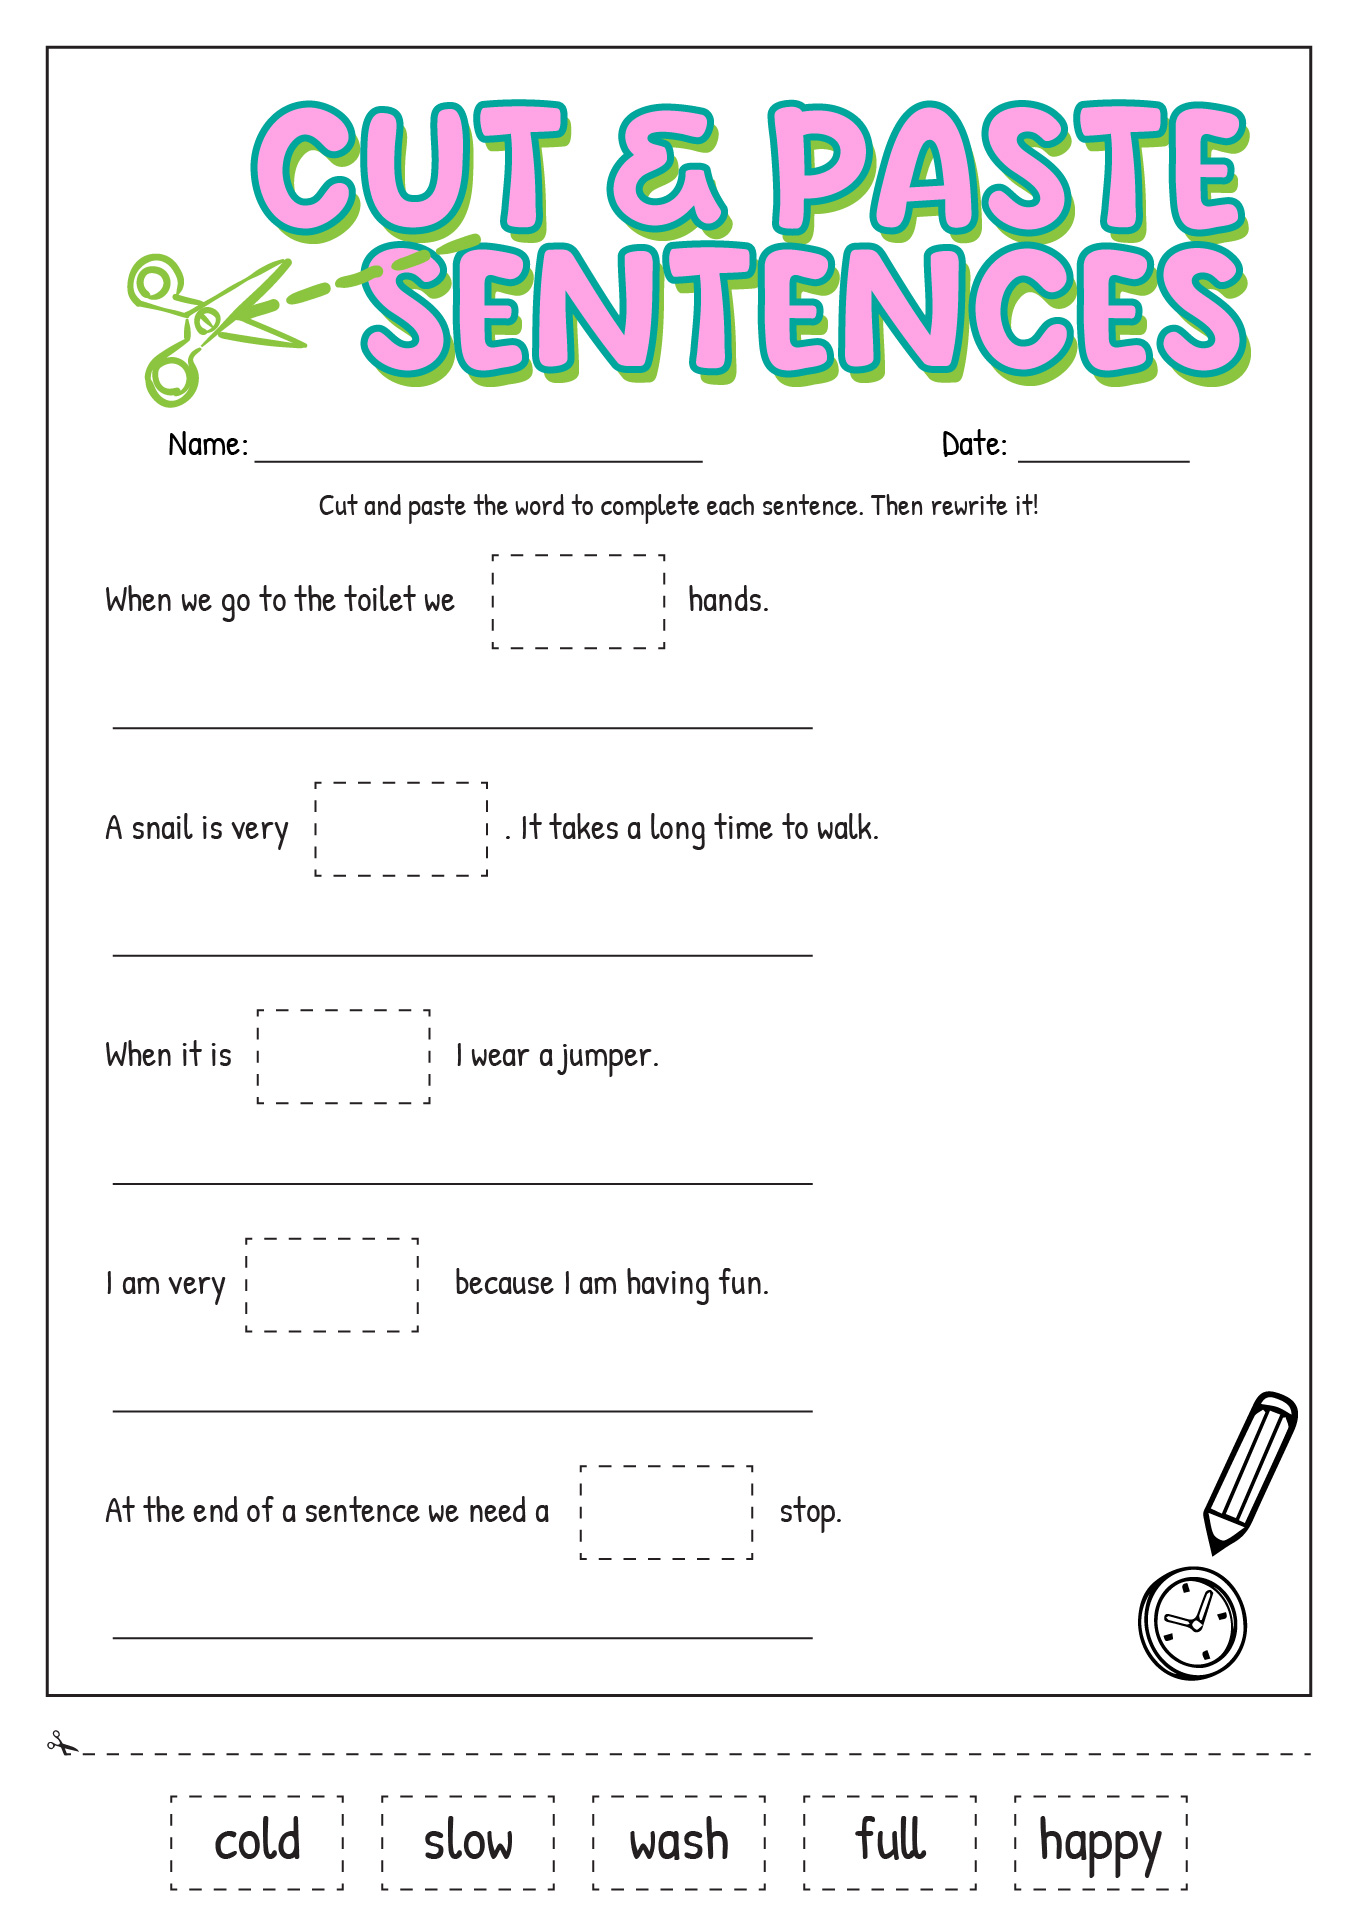 12-best-images-of-cut-and-paste-sentence-worksheets-complete-and-incomplete-sentences-cut-and